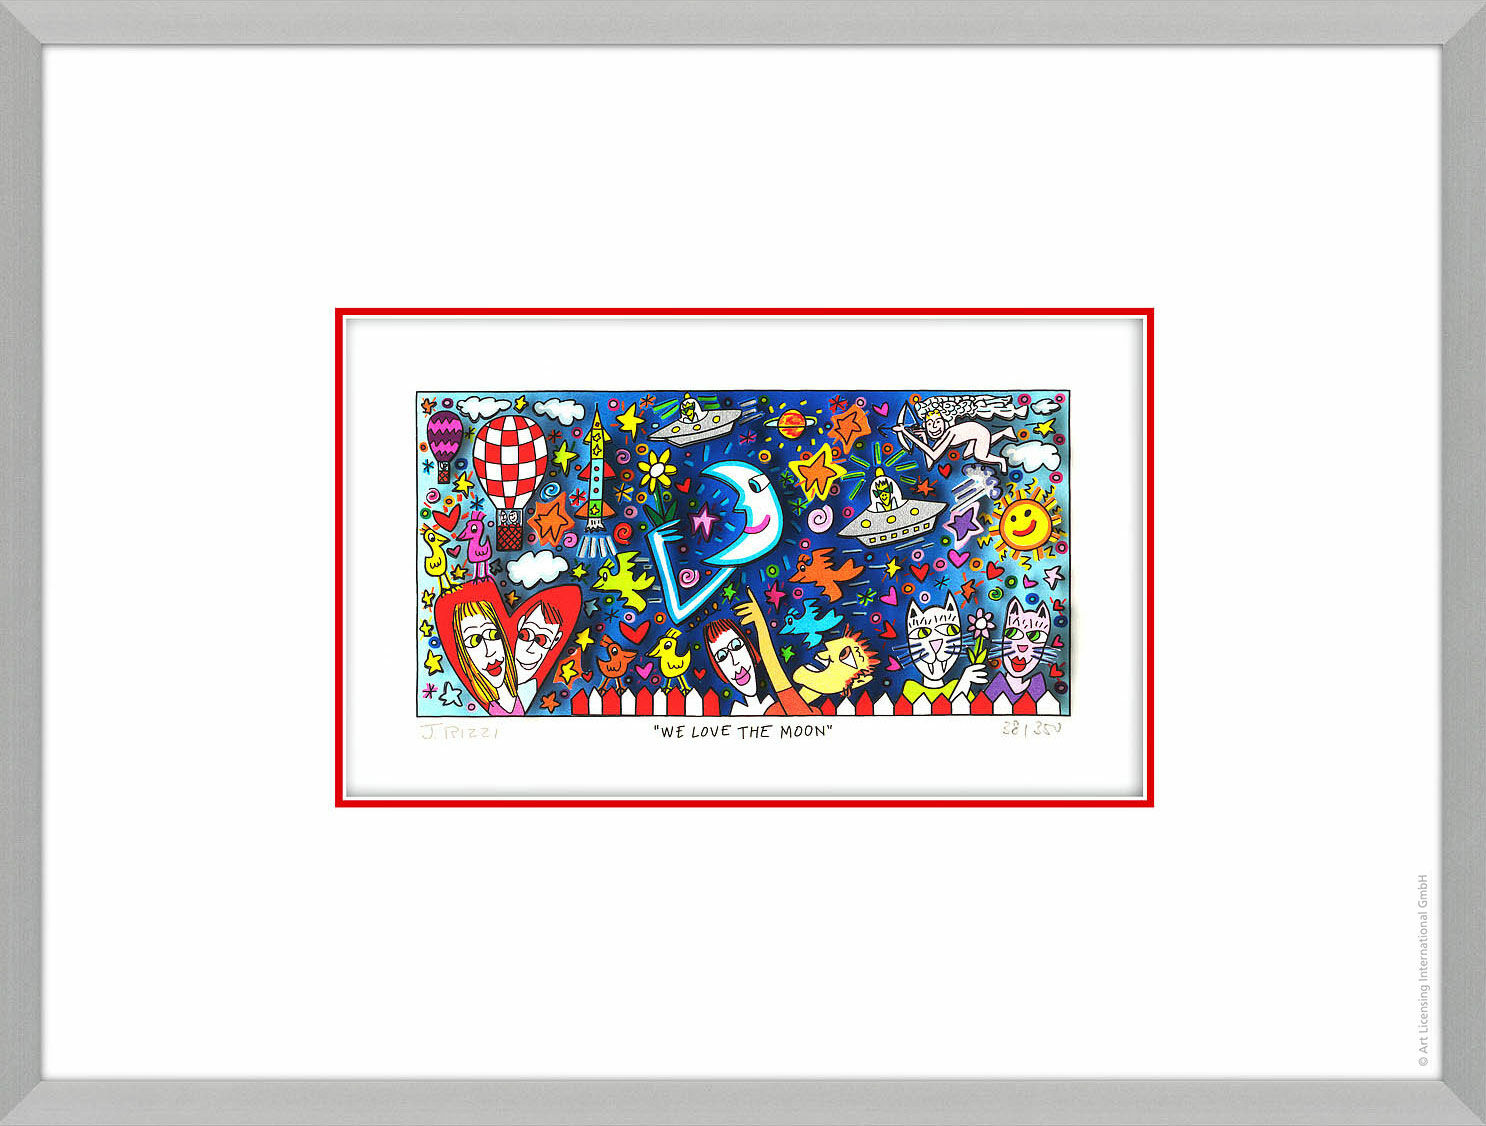 3D Picture "We Love the Moon" (2020), framed by James Rizzi